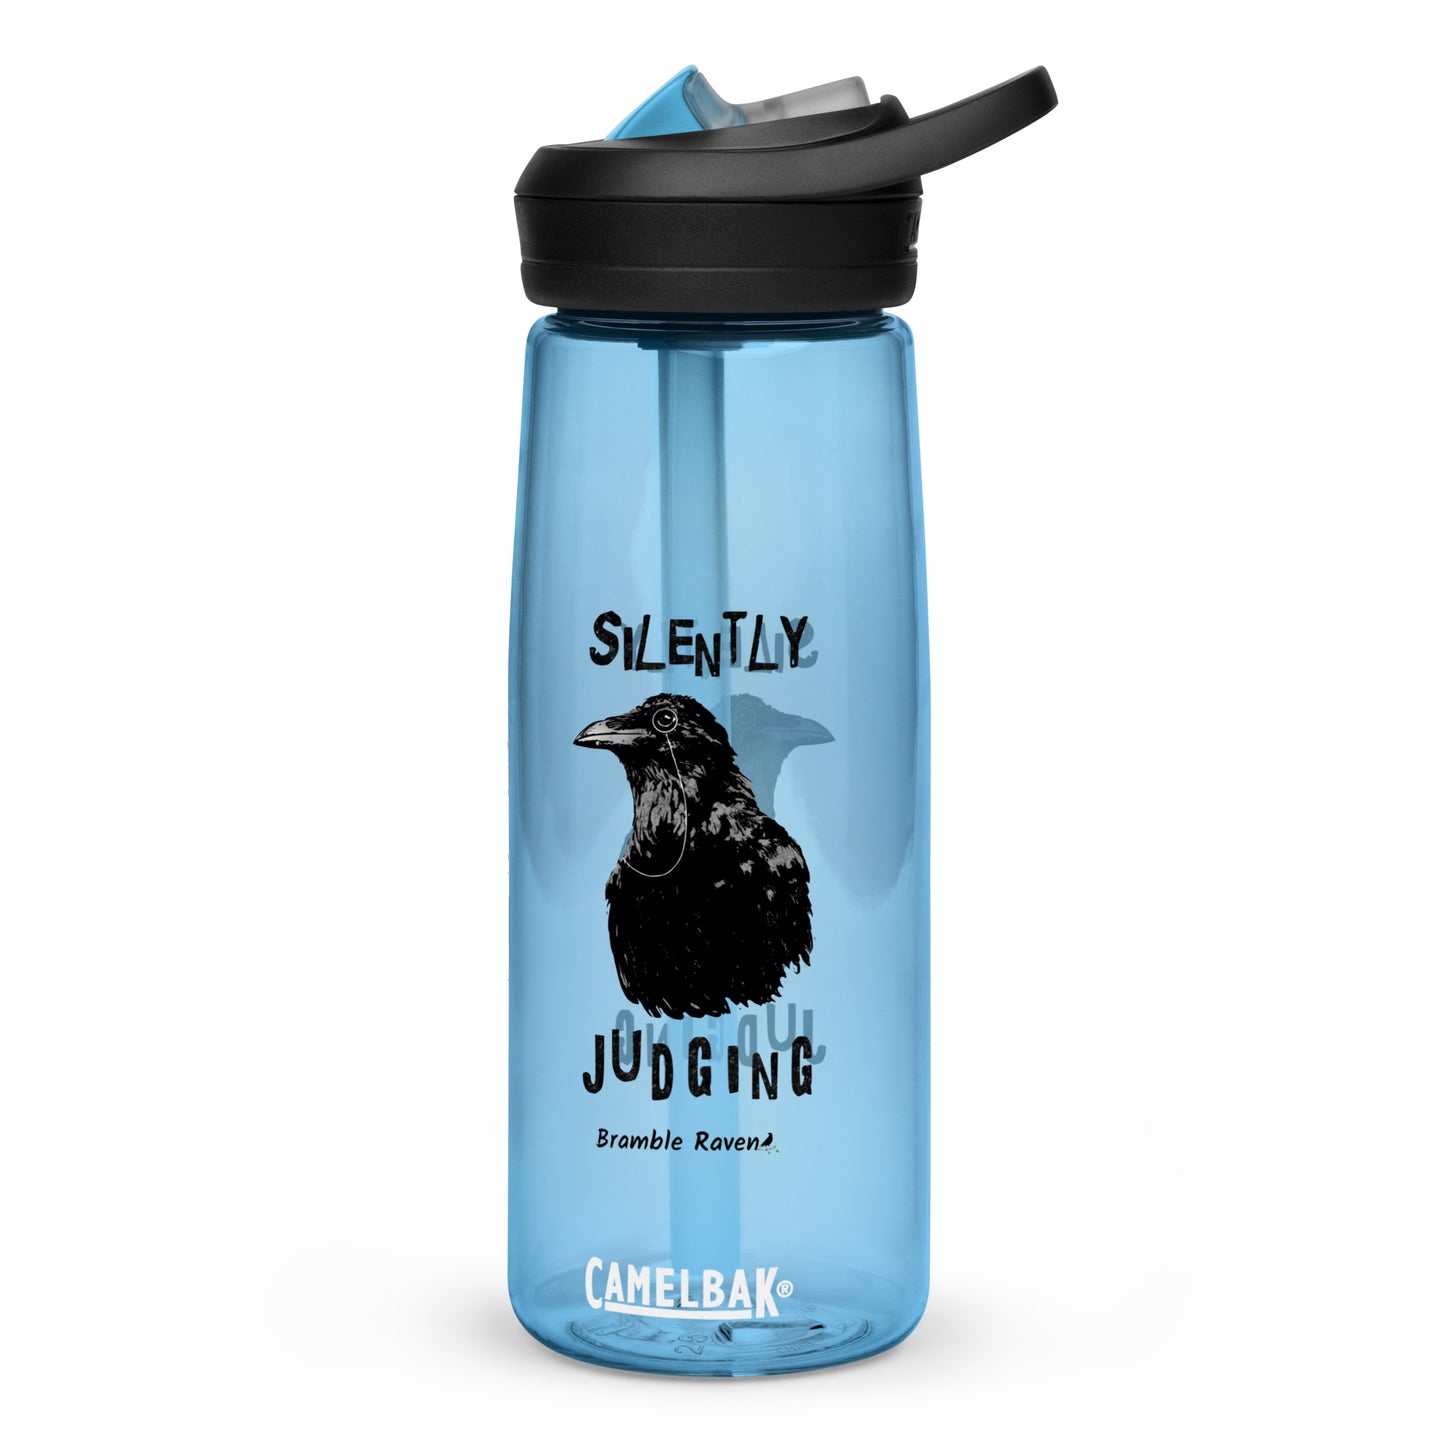 25 ounce sports water bottle with spill-proof lid and bite valve. Light blue stain and odor-resistant BPA-free plastic. Features double-sided design of Silently Judging Crow with his monocle.